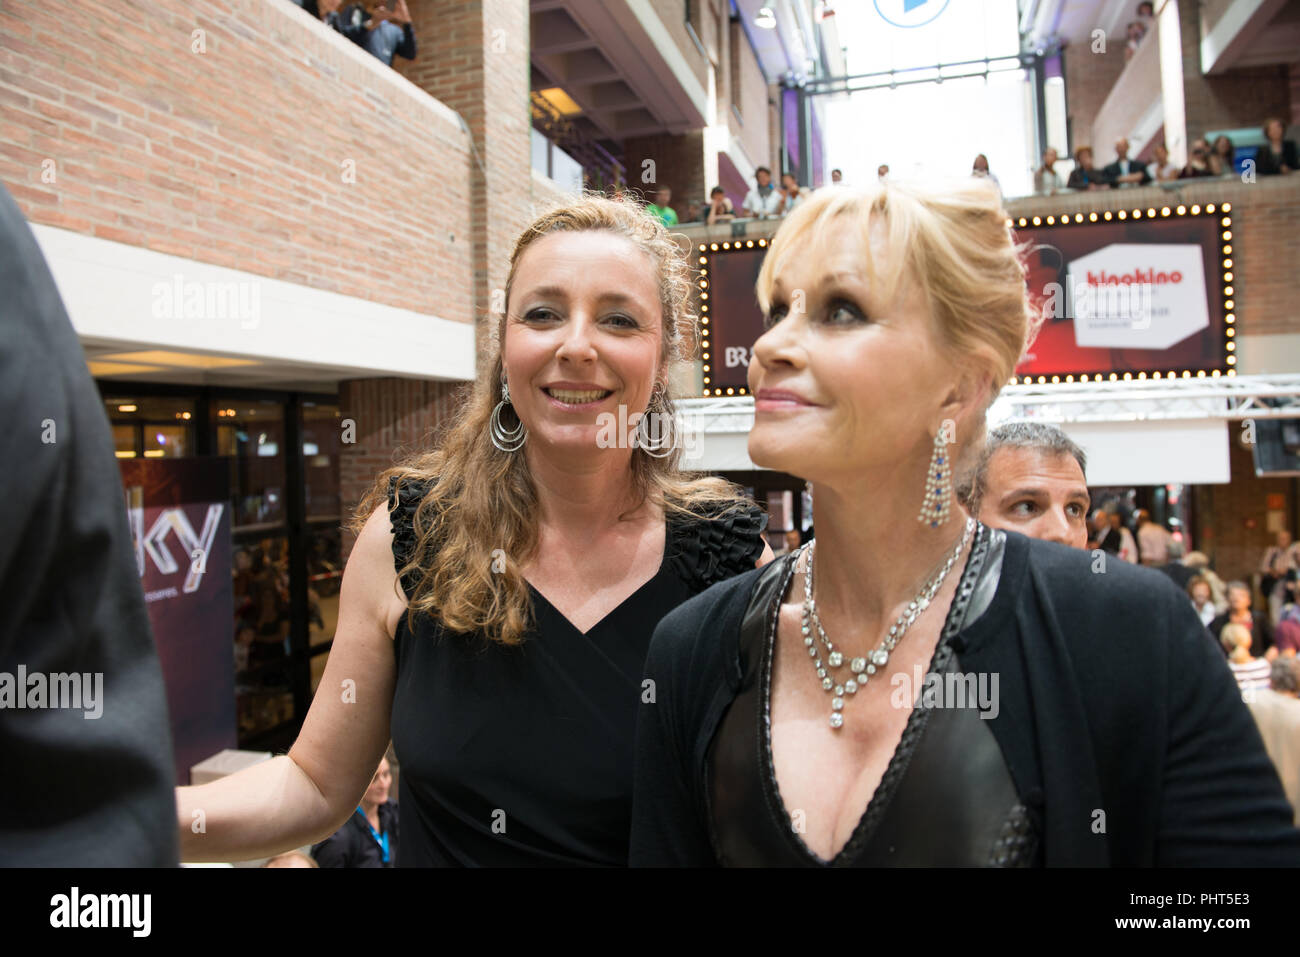 Actress Melanie Griffith arrives at Filmfest München 2012 together with Festival Director Diana Iljine Stock Photo